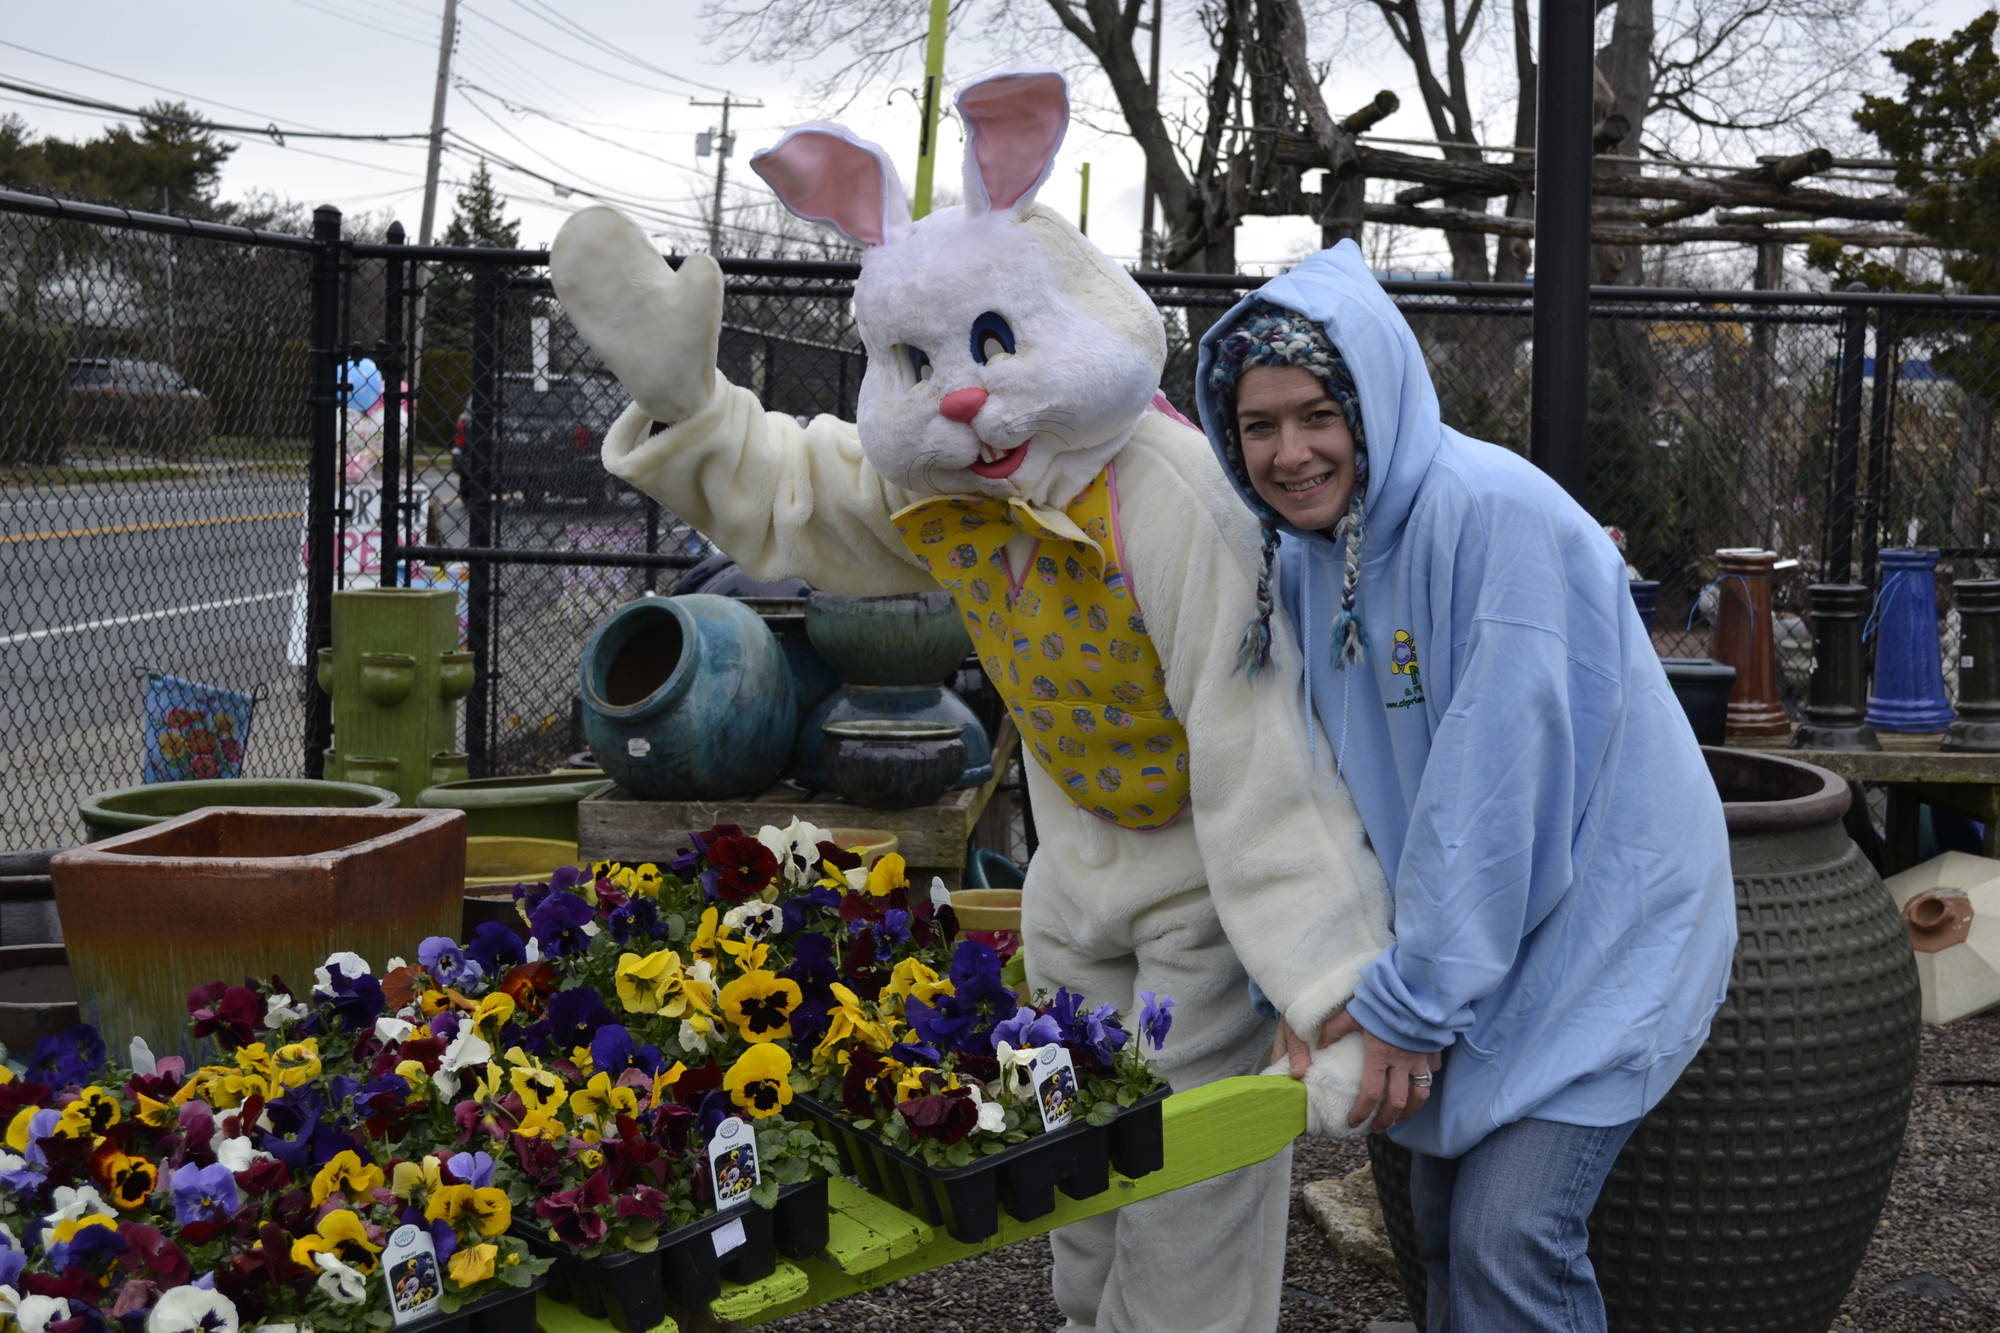 Unseasonably cold weather didn’t stop the festivities at Cipriano Nursery’s annual egg hunt last Saturday, as co-owner Maria Cipriano got reacquainted with a certain seasonal friend.